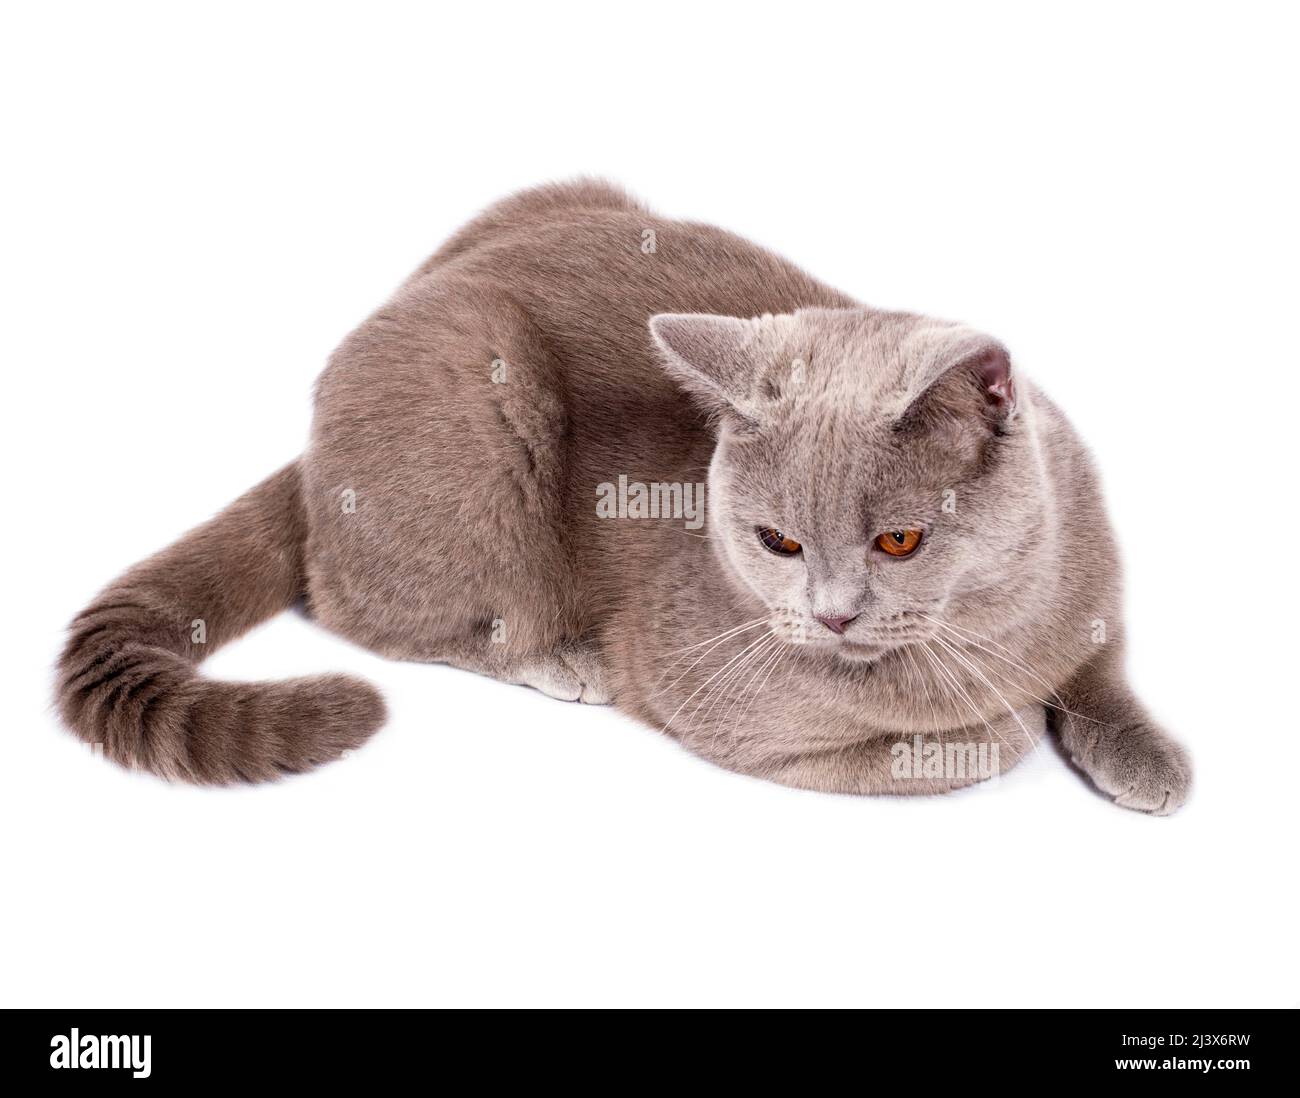 serious perfect Scottish cat with orange eyes sitting on a white background, isolated image, beautiful domestic cats, cats in the house, pets Stock Photo